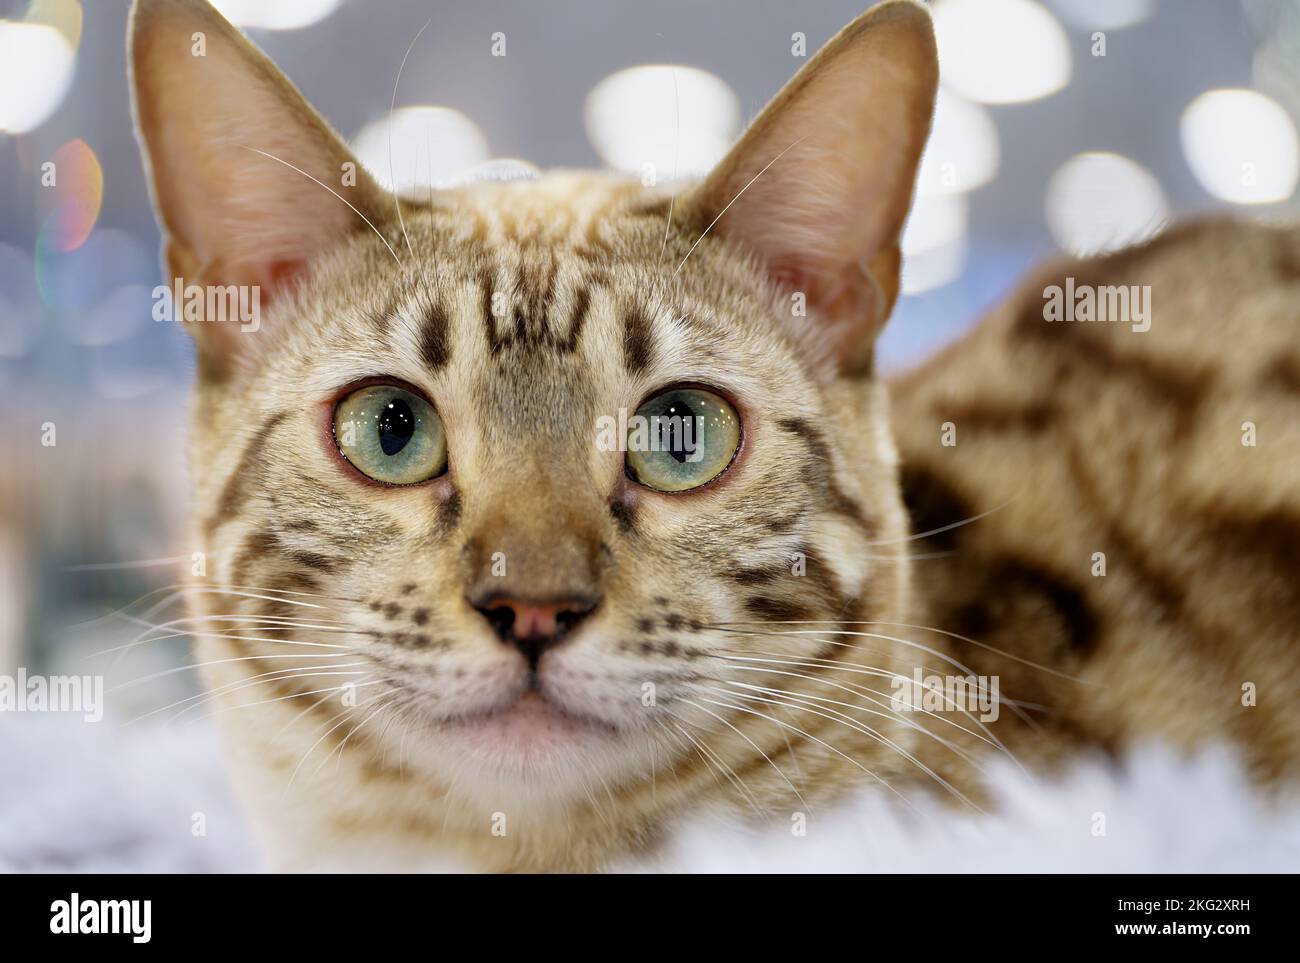 Young exotic bengal cat, short brown hair, close-up portrait Stock Photo